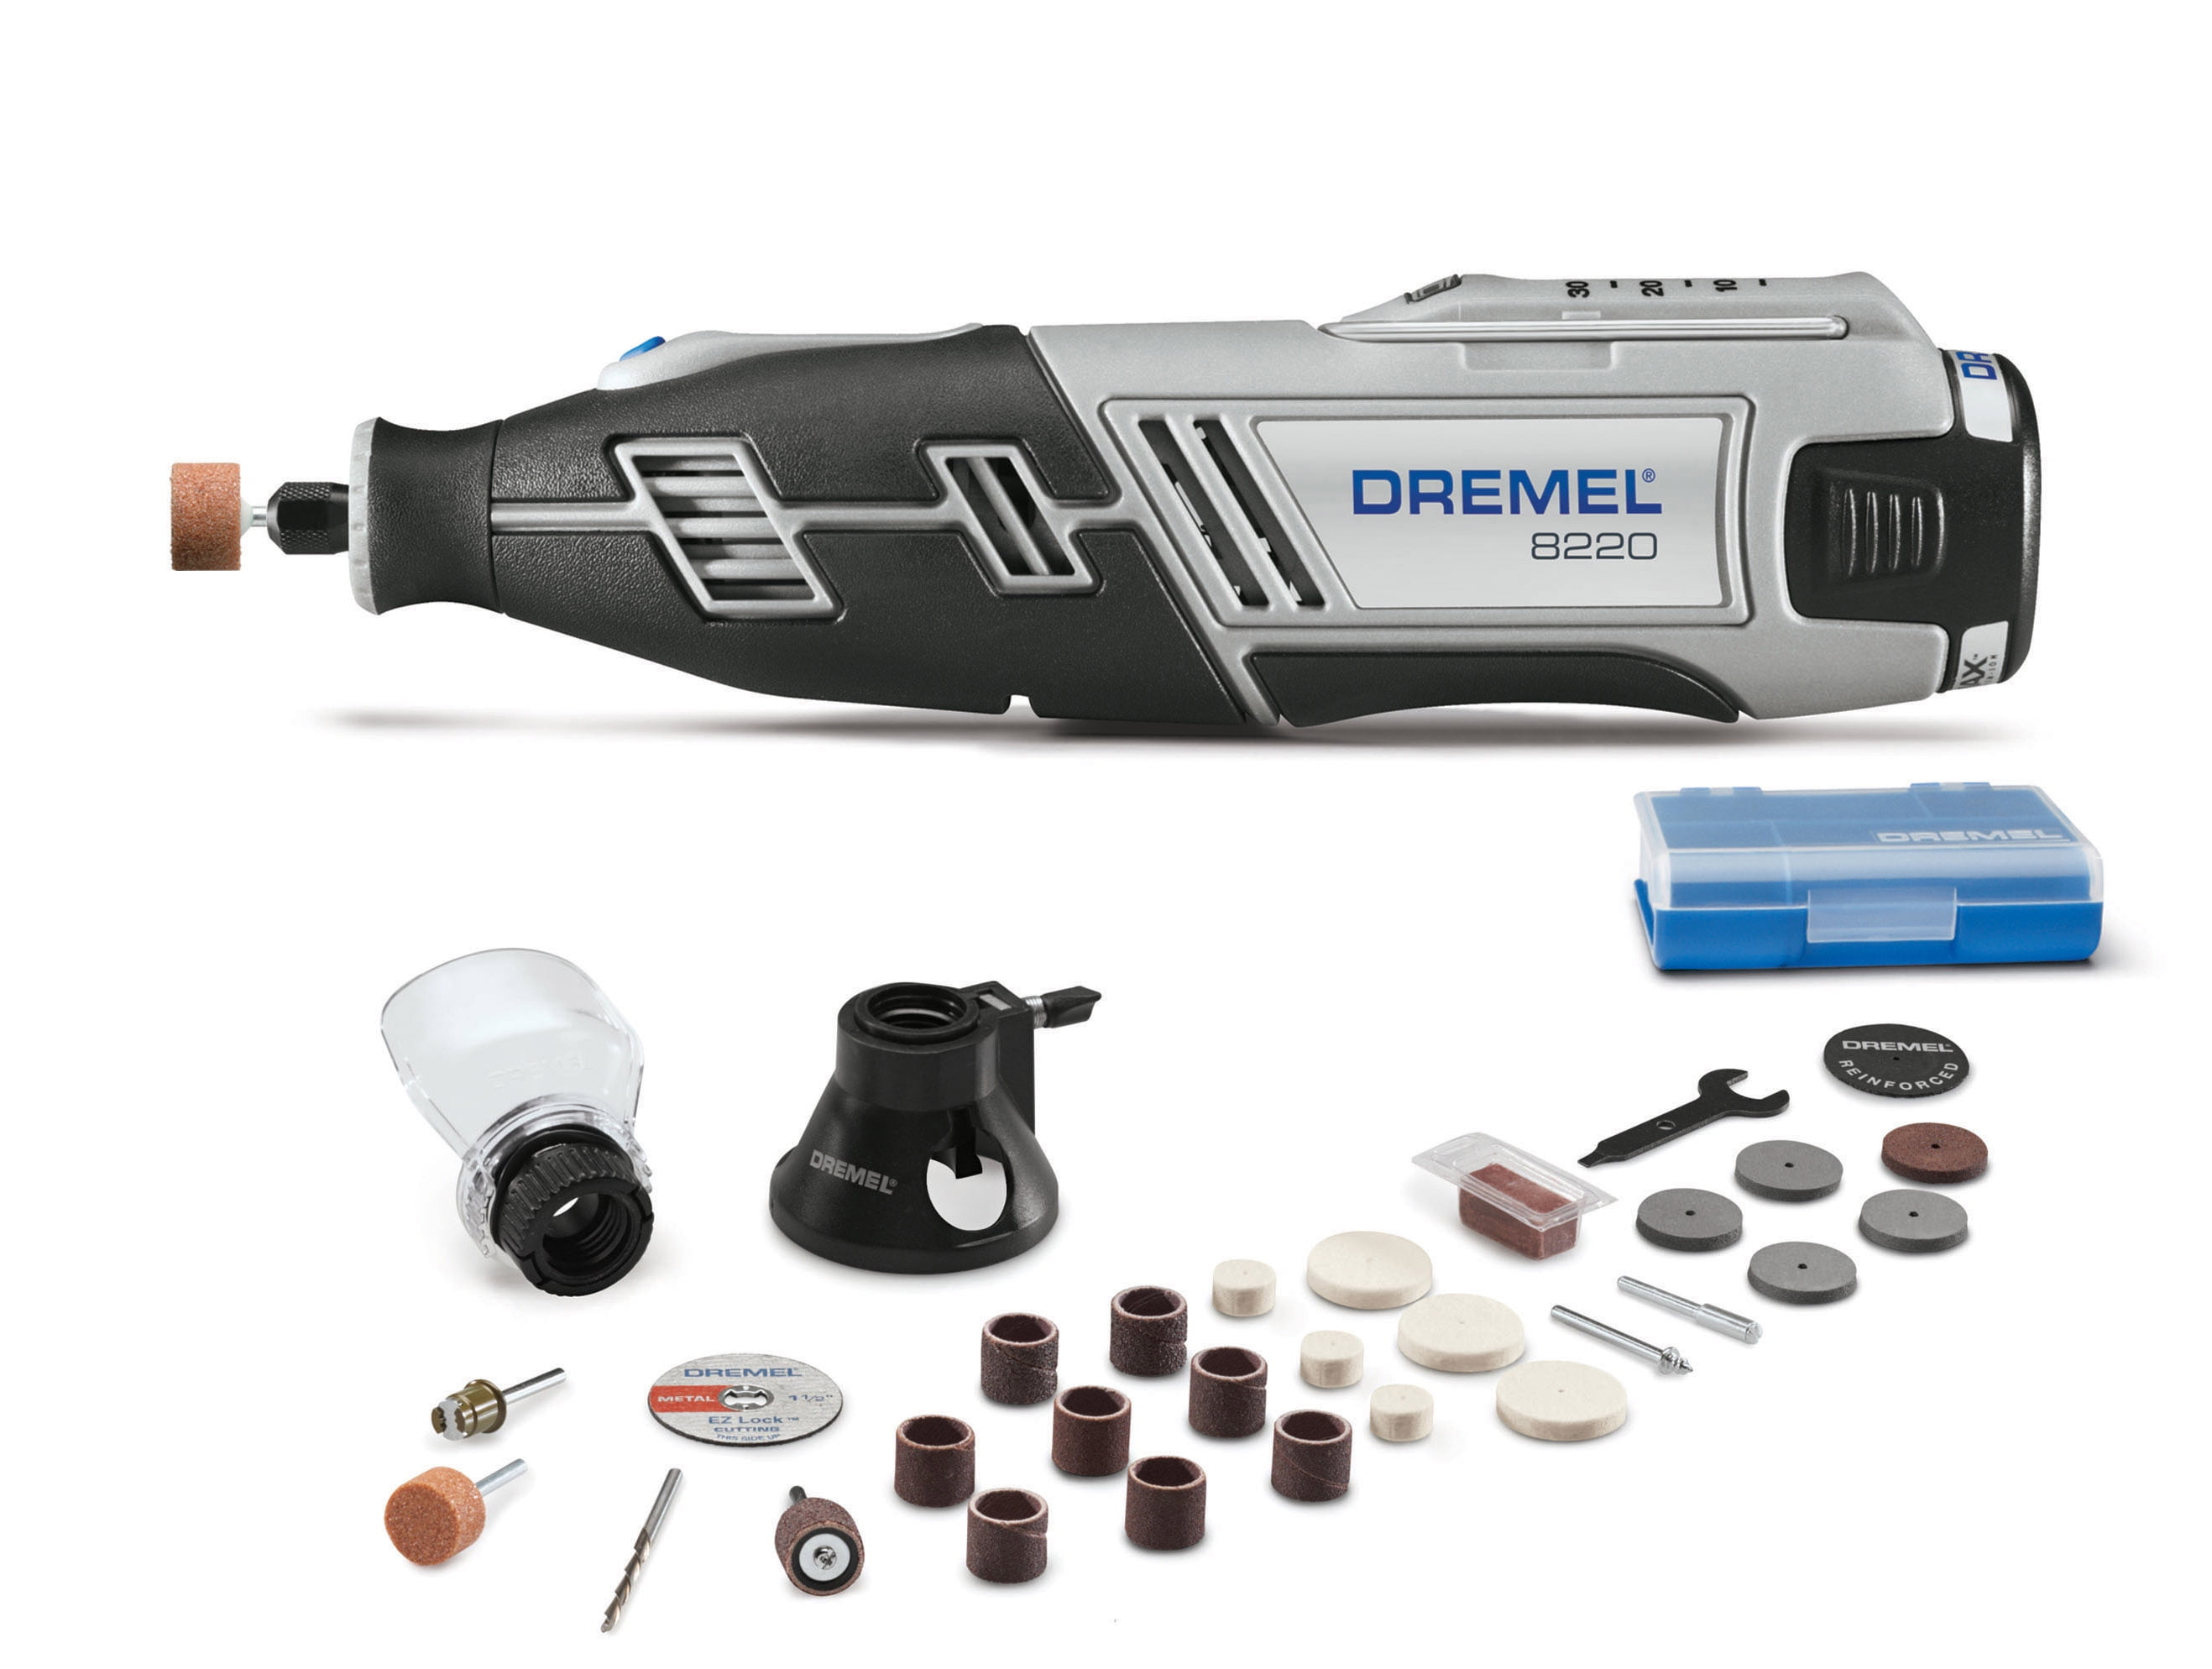 Dremel 8220-1/28 MAX Lithium-Ion Cordless Rotary Tool Kit with 2 Attachments - Walmart.com